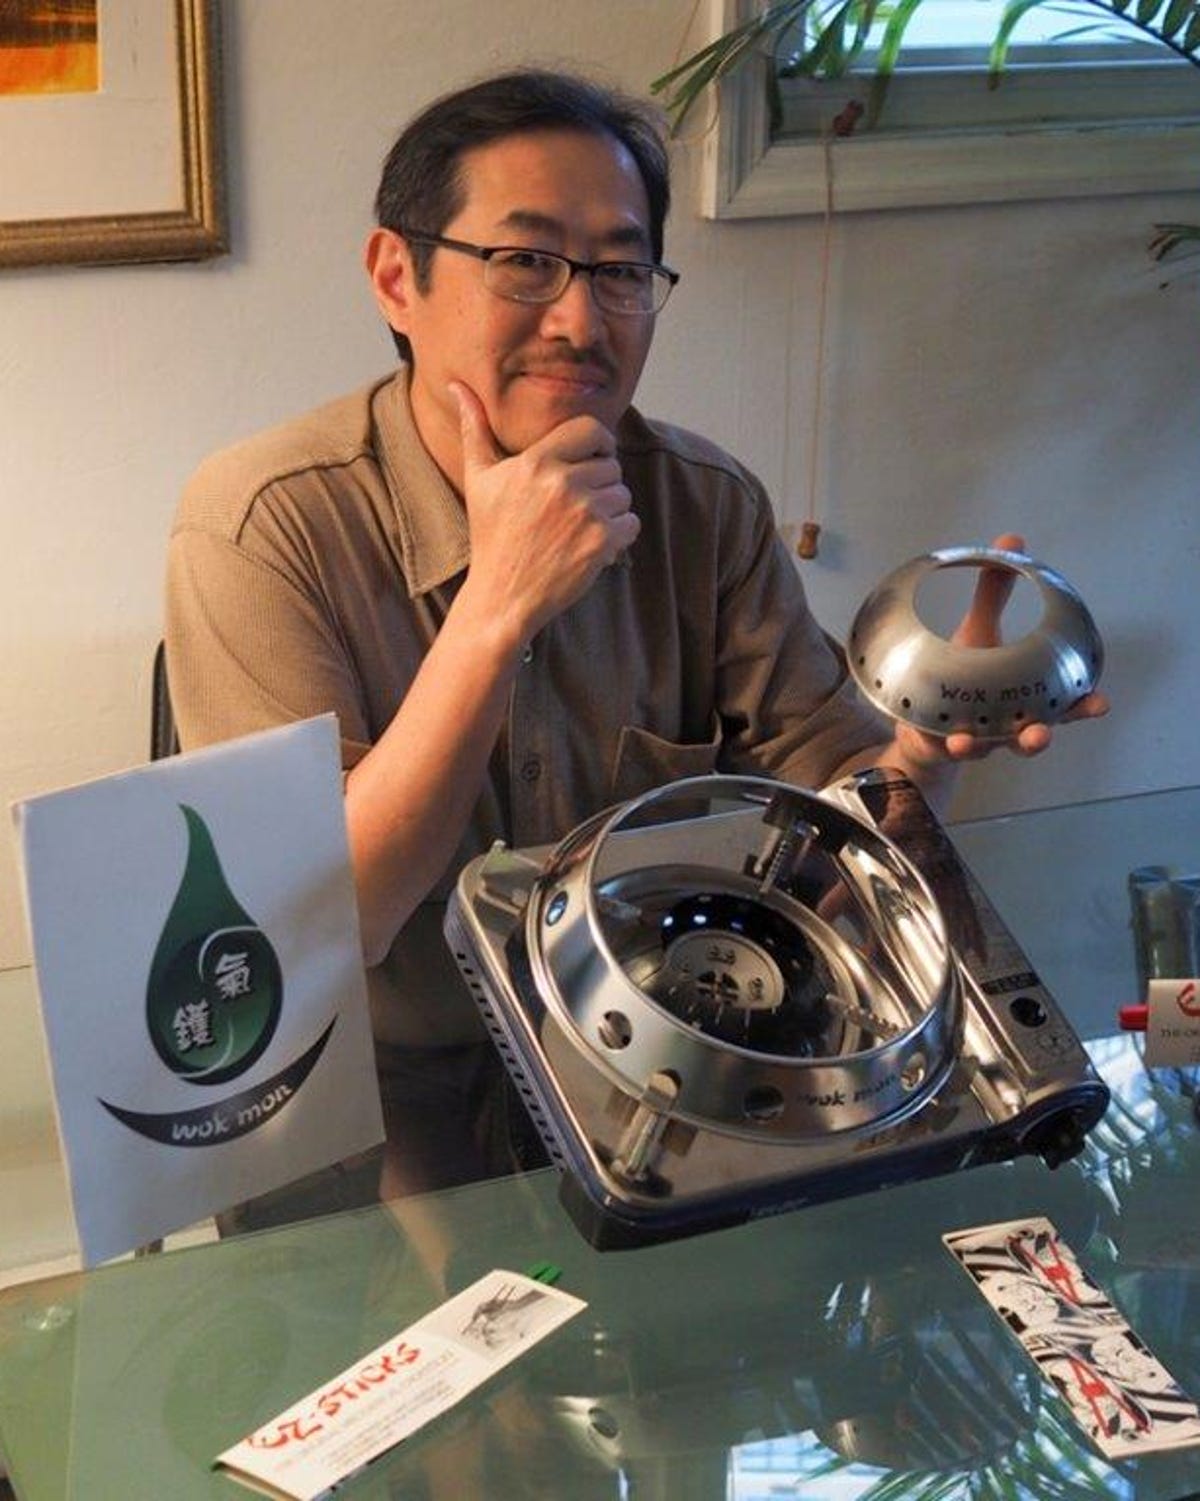 Glen Lee, the inventor of the WokMon poses with his invention and a portable burner. The secret is a focusing ring that concentrates flames from a gas range into one area.